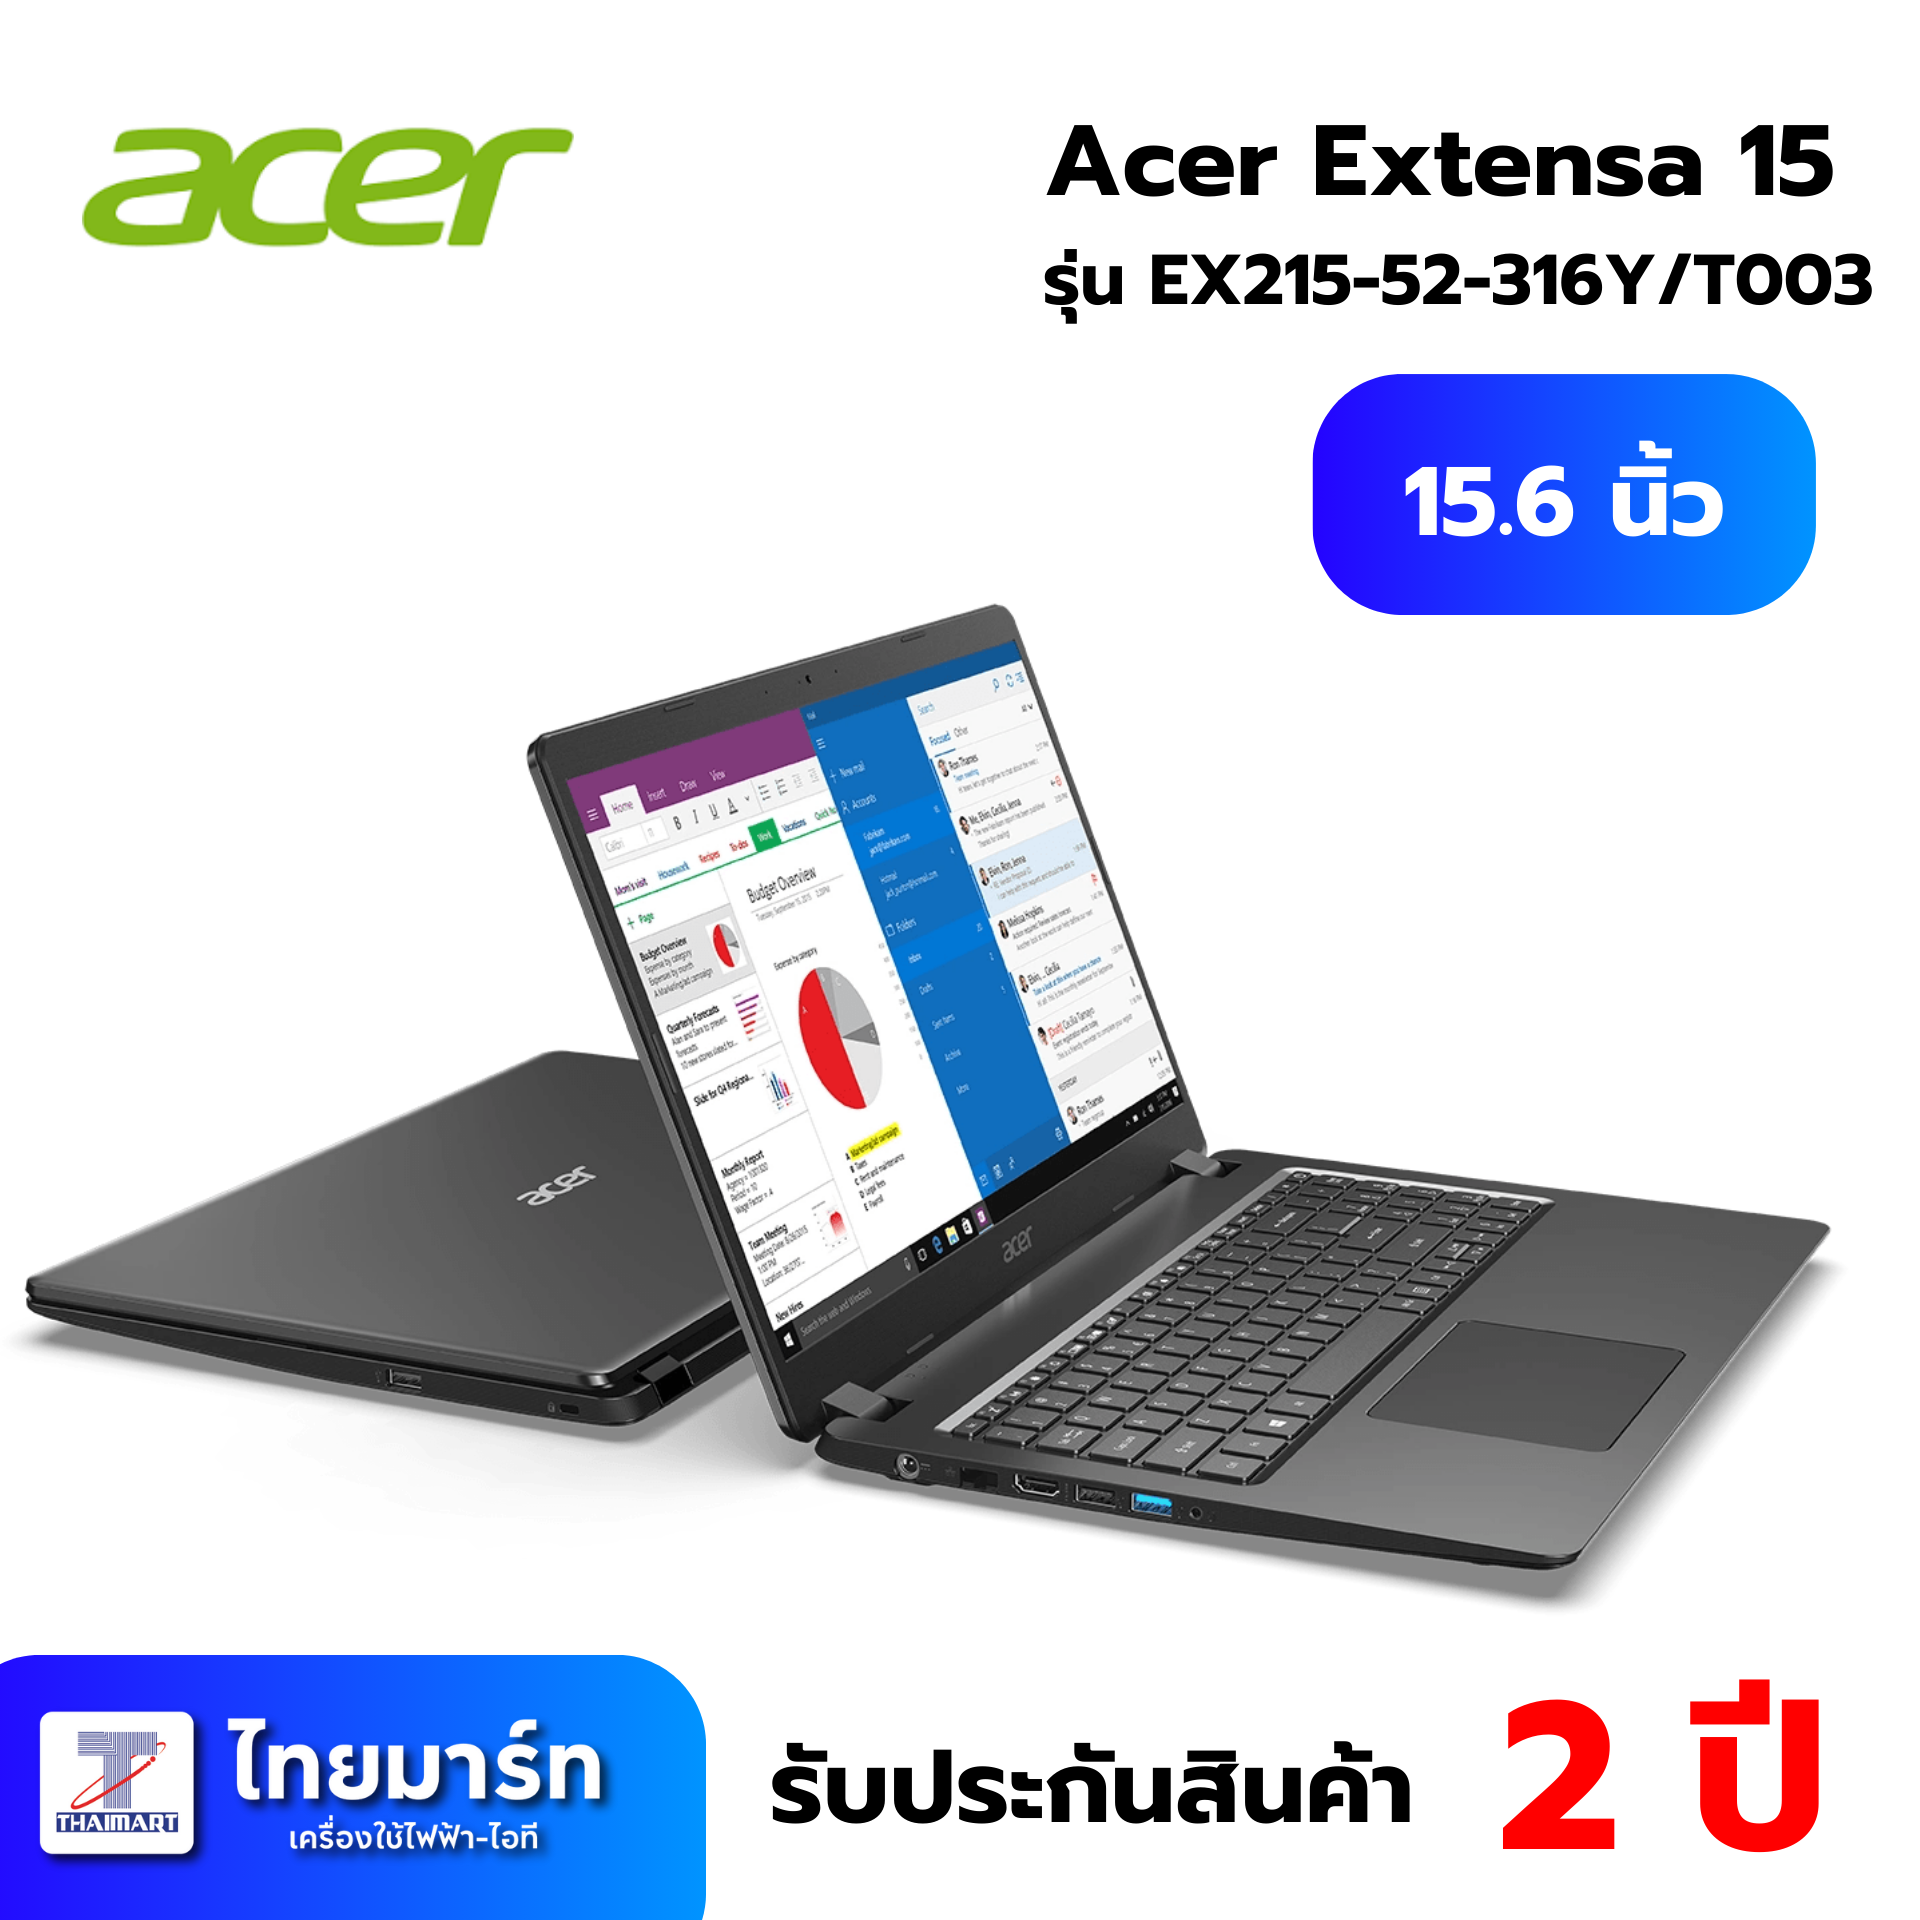 Notebook 15.6"  Acer EX215-52-316Y/T003